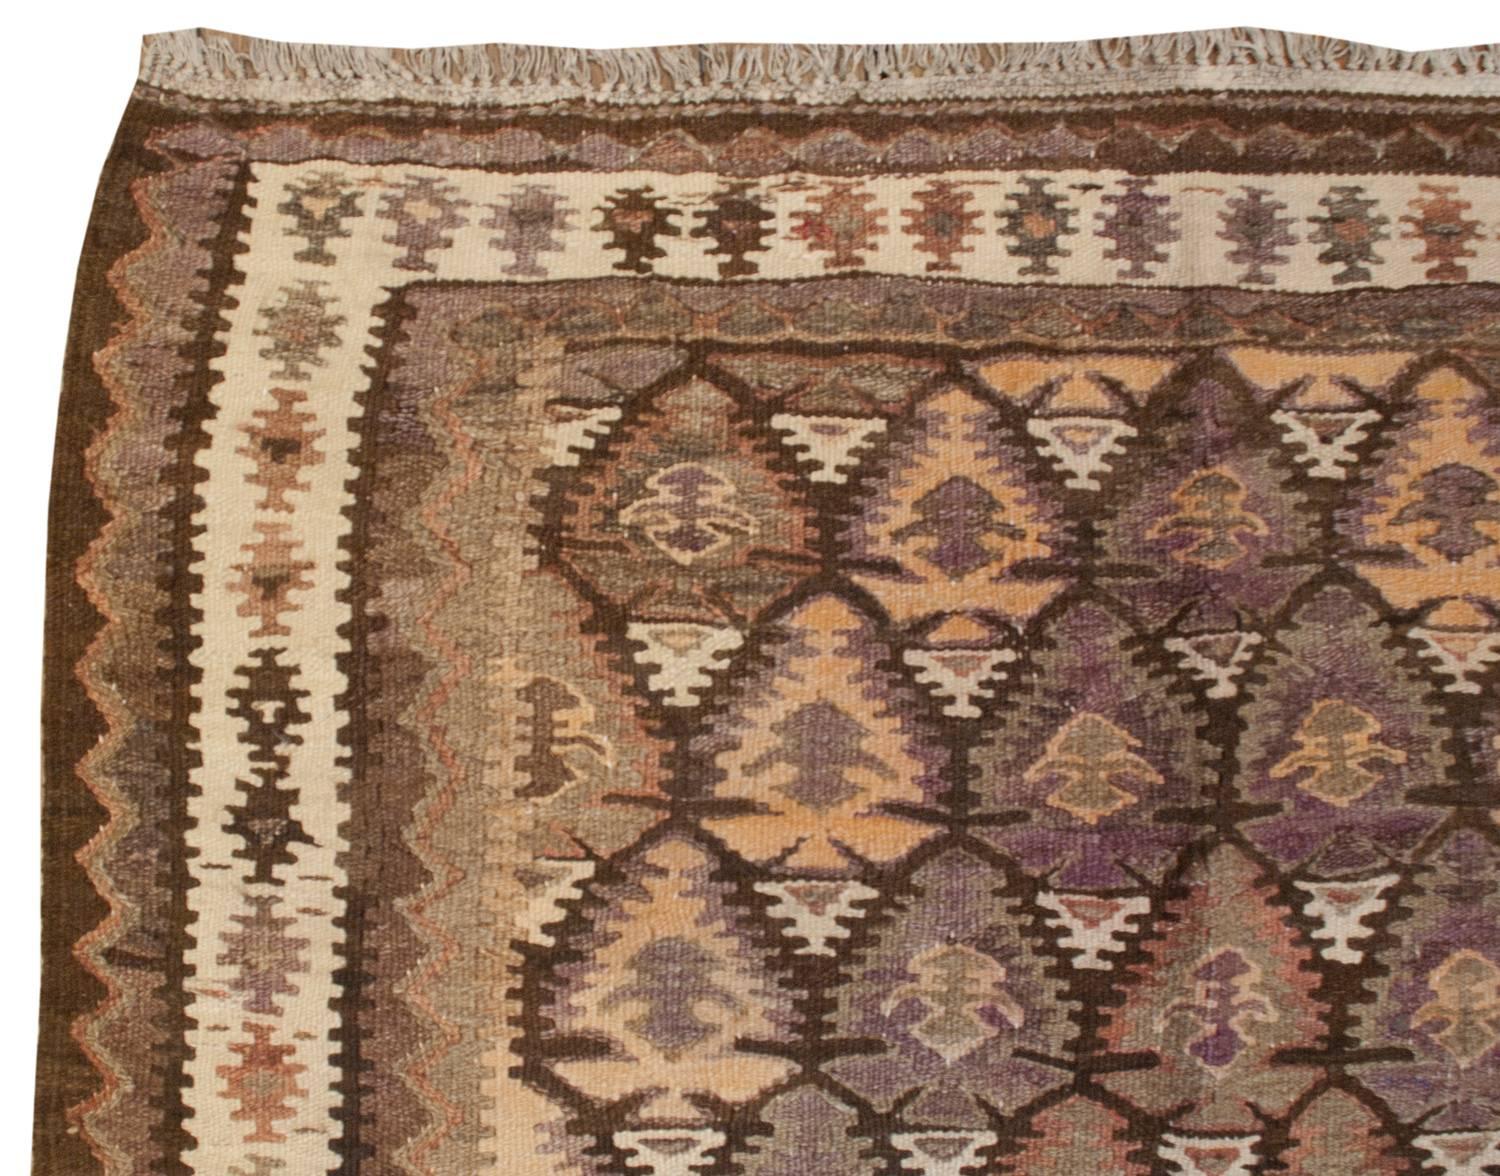 An incredible early 20th century Persian Qazvin Kilim runner with a skillfully woven tree-of-life pattern with each tree having multicolored layers. Between the trees are white triangle forms. The border is comprised of three distinct patterns. The